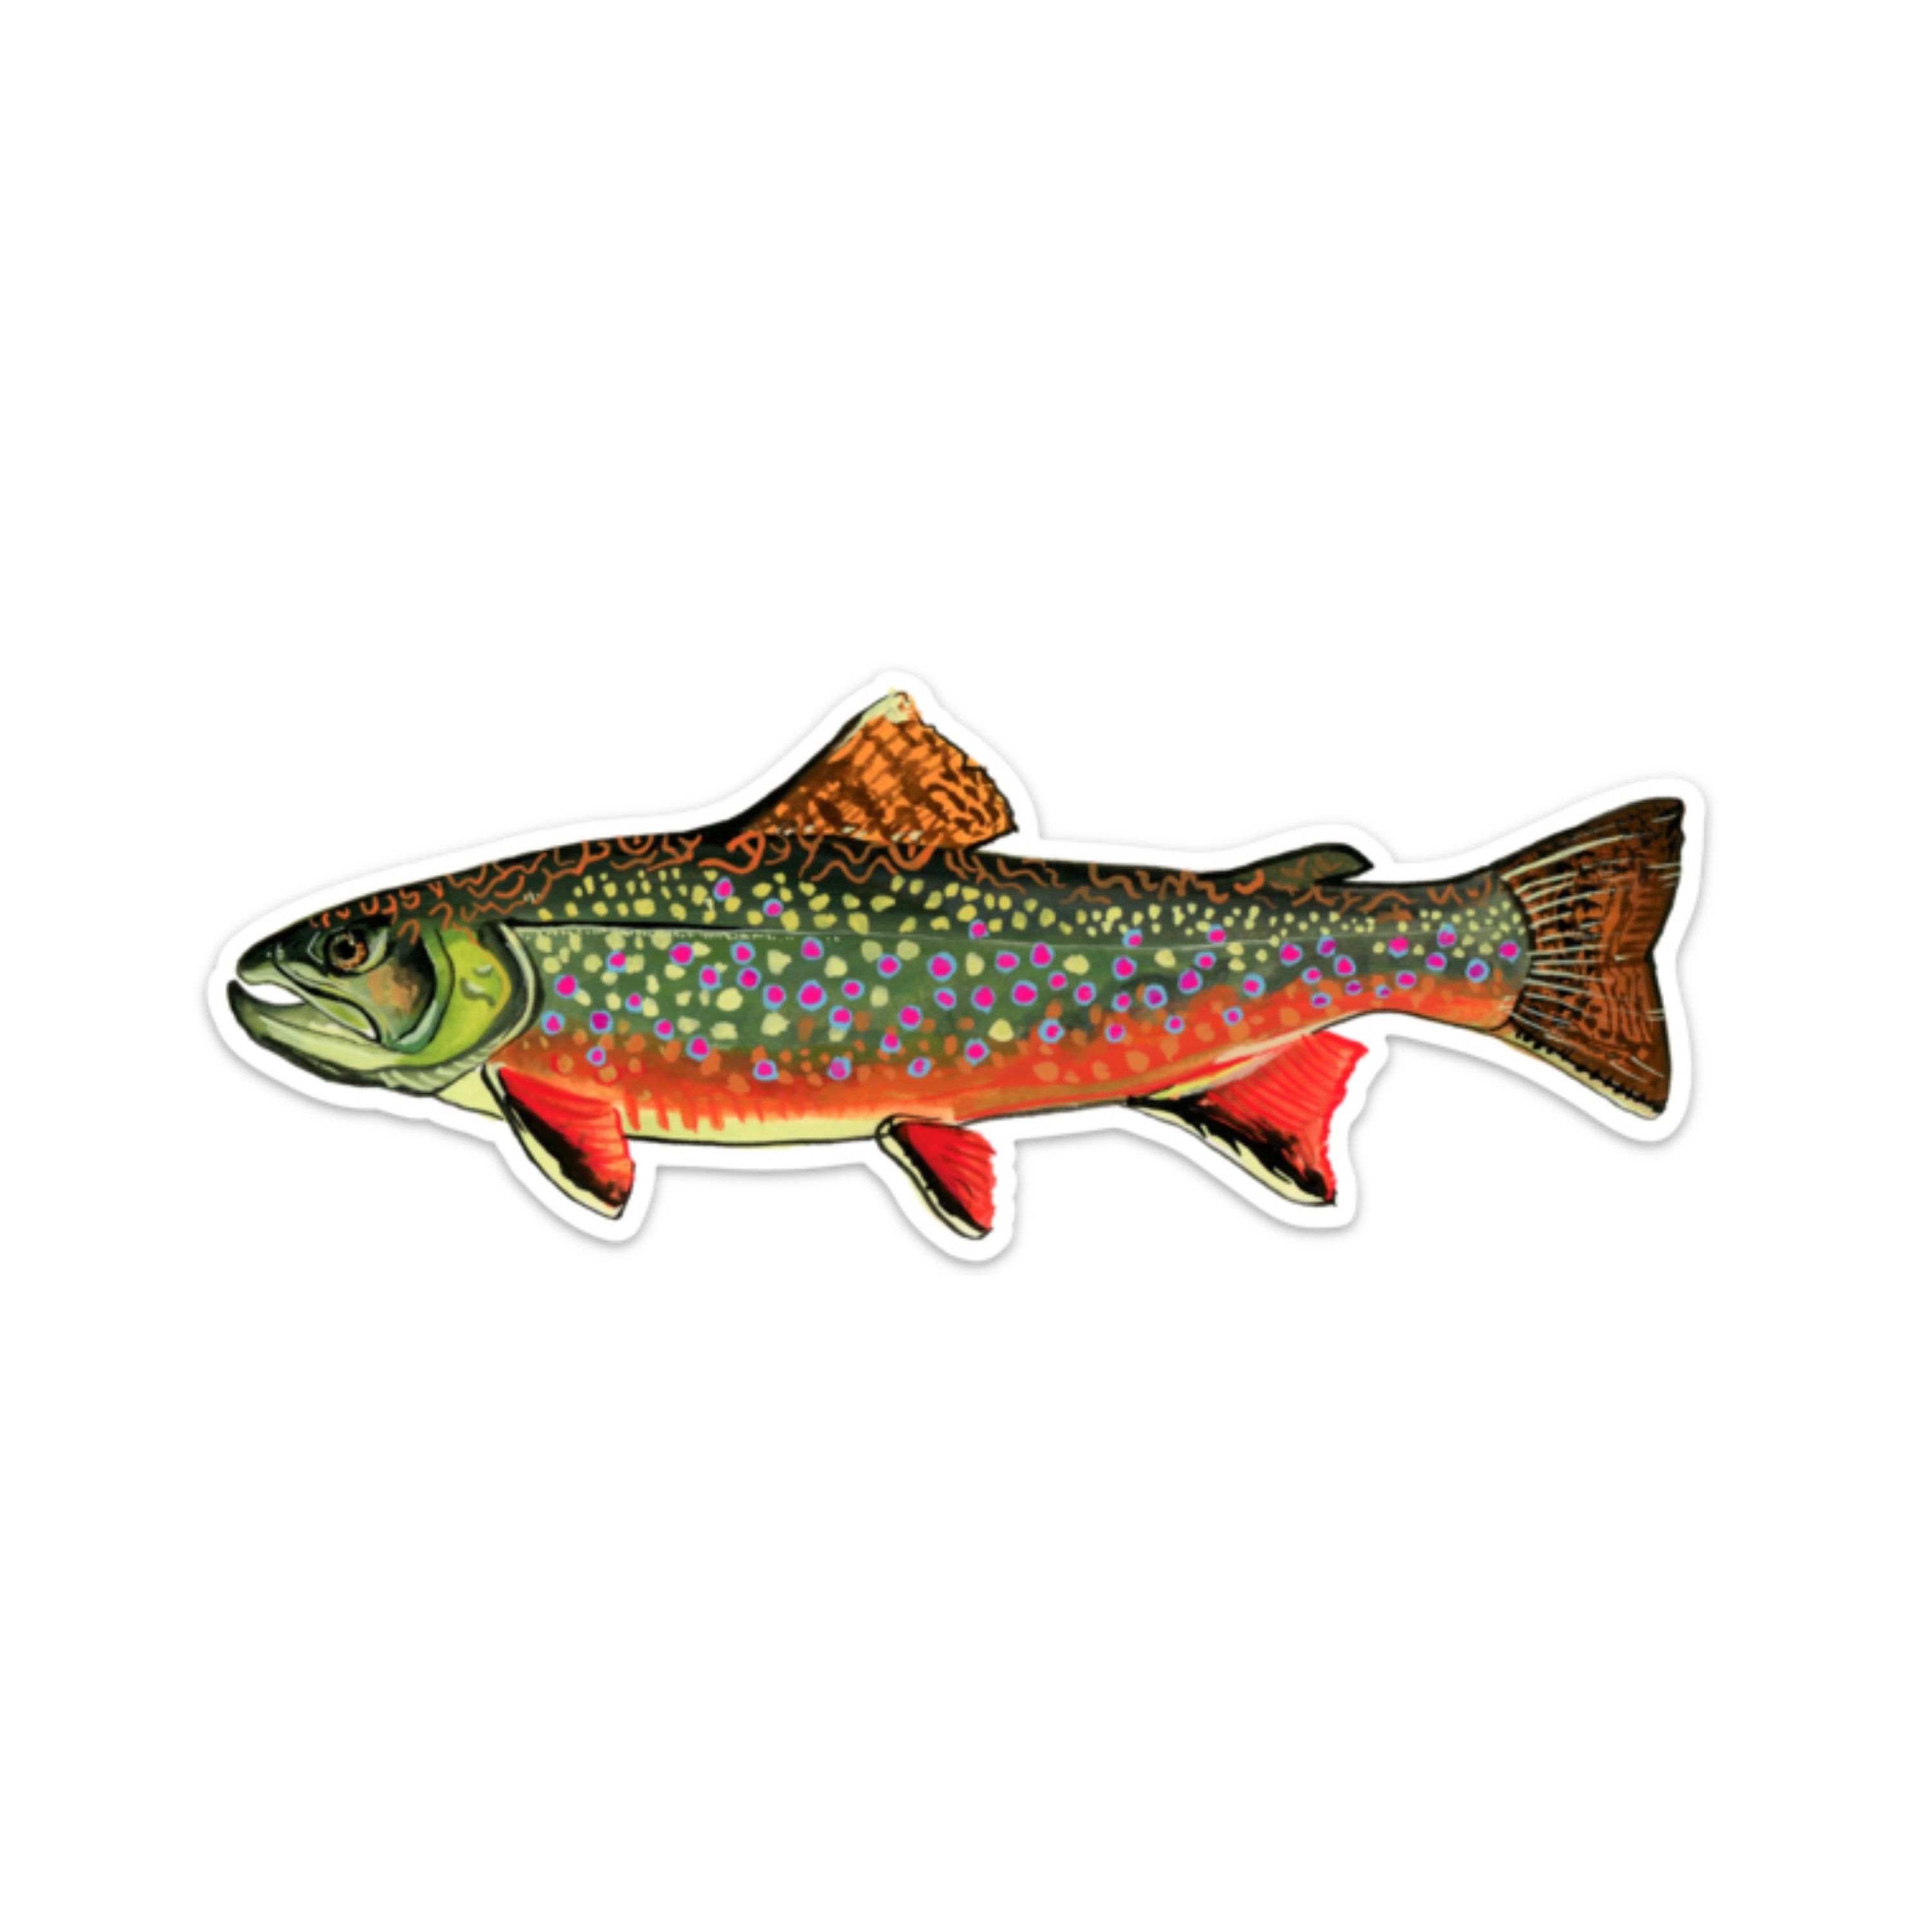 Buy Bumper Decal Angler Online In India -  India